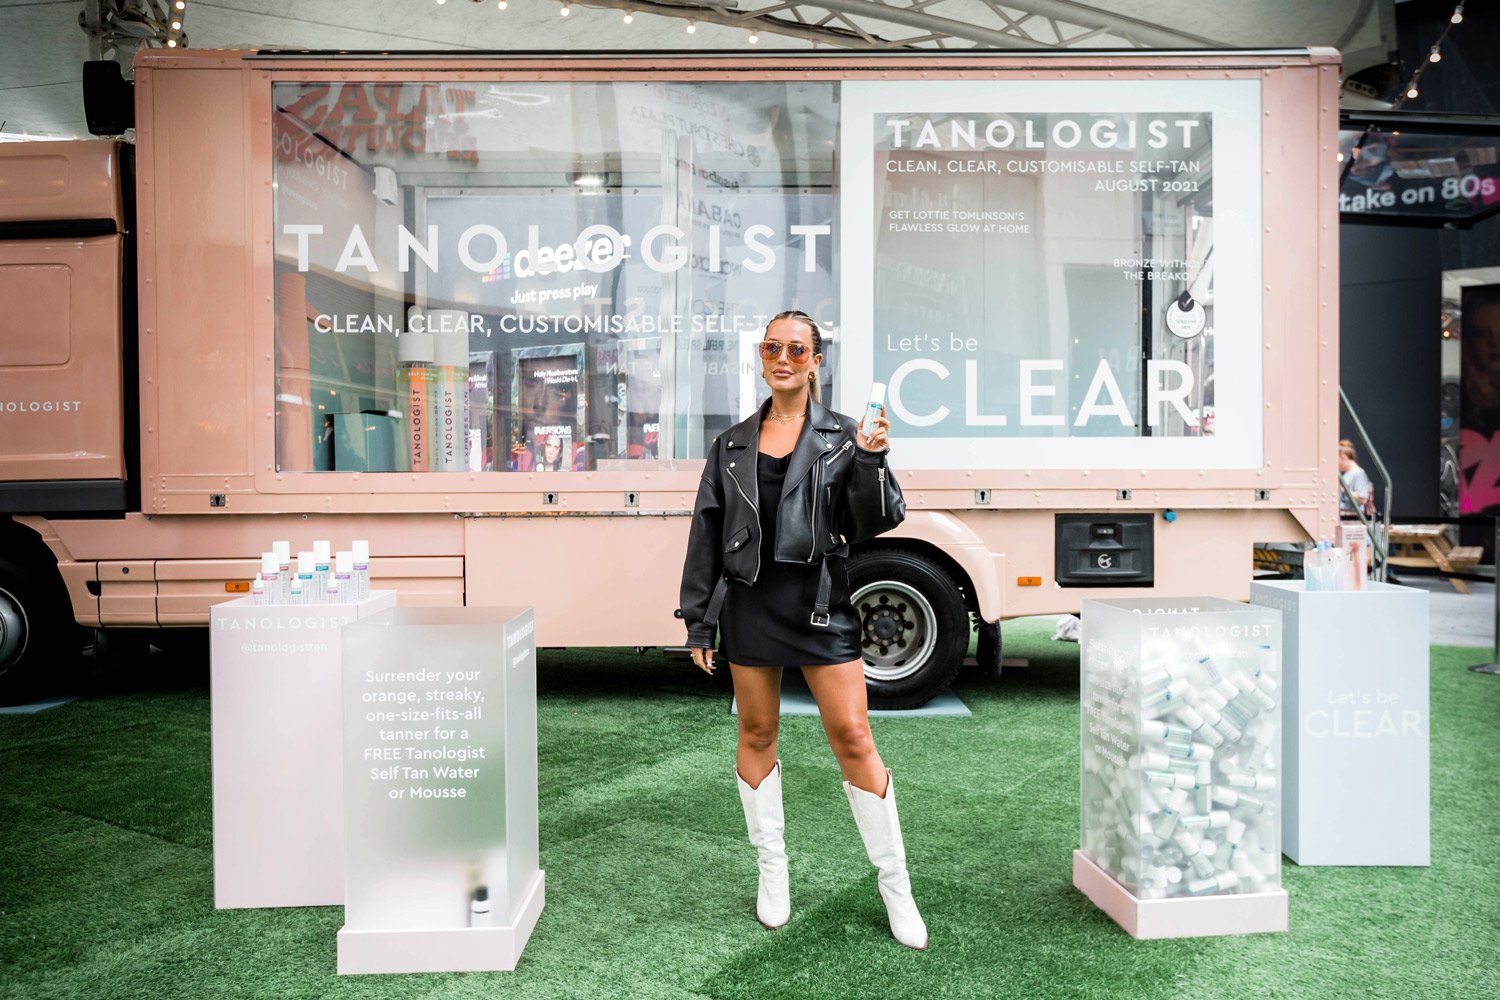 Tanologist - Let's be clear - Pop Up  Agency